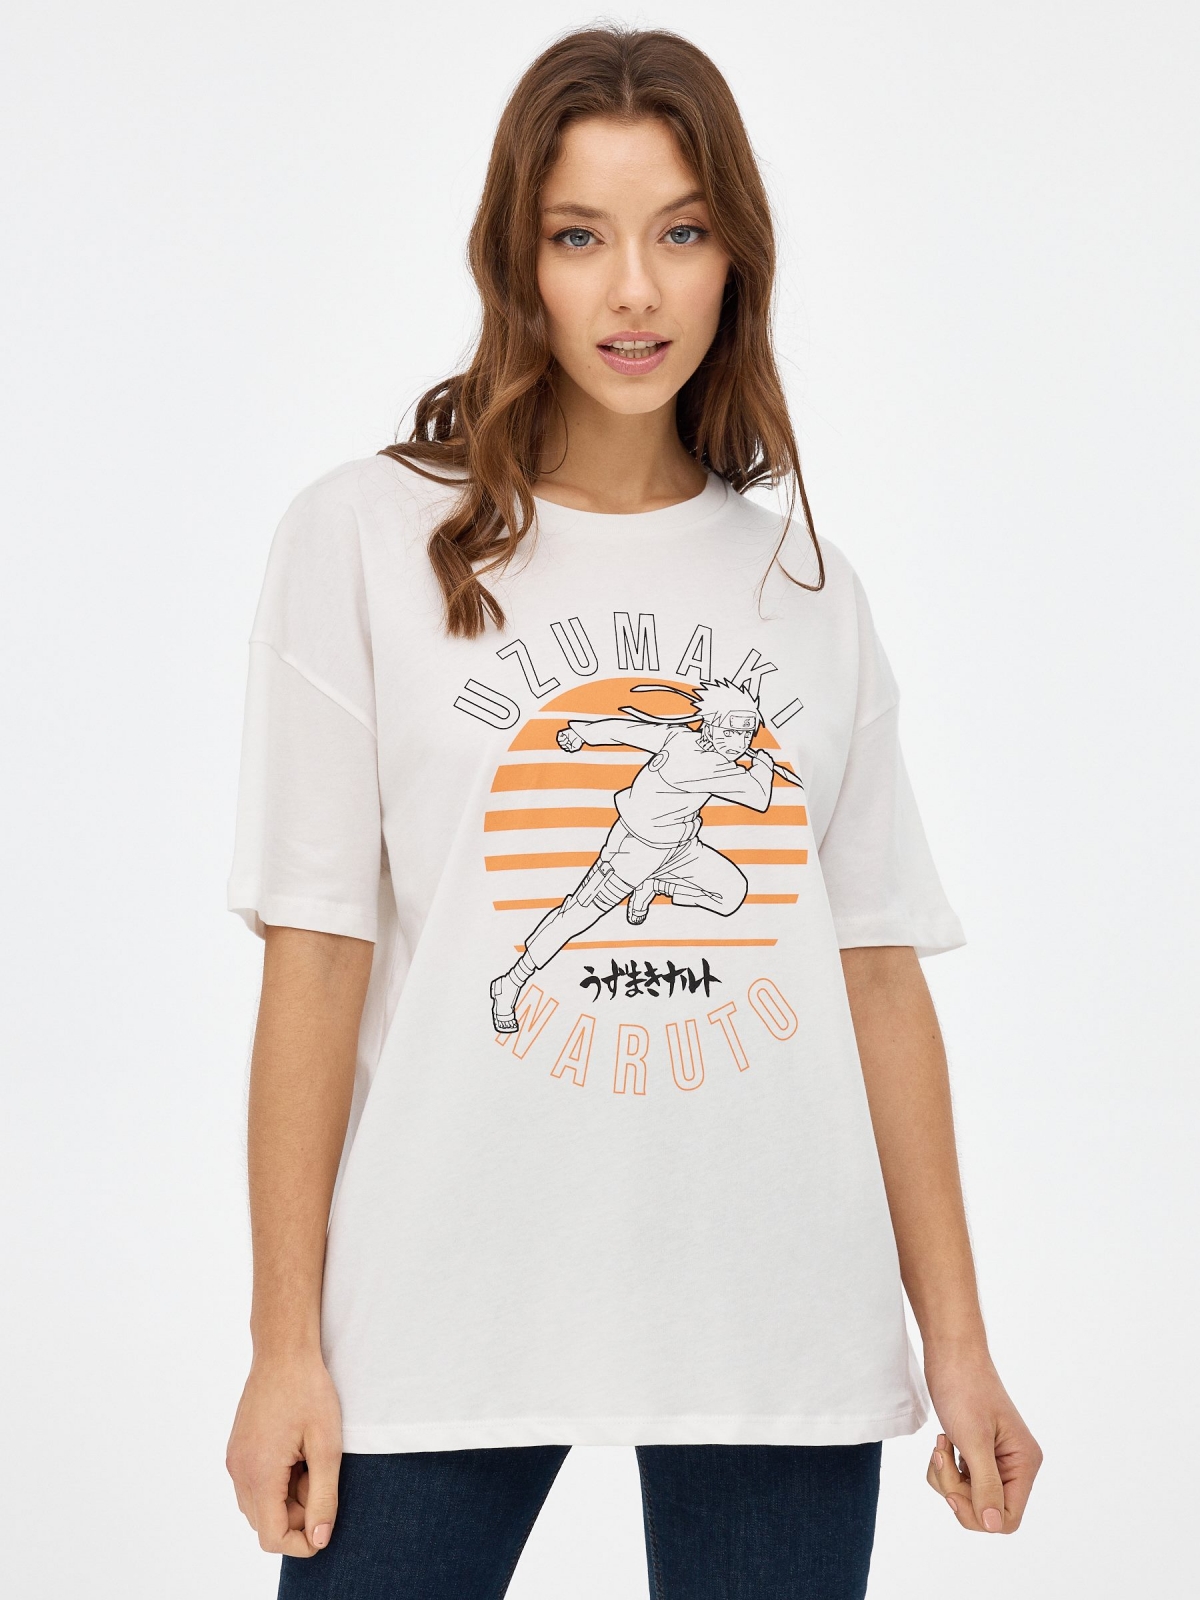 Naruto  T-shirt off white middle front view